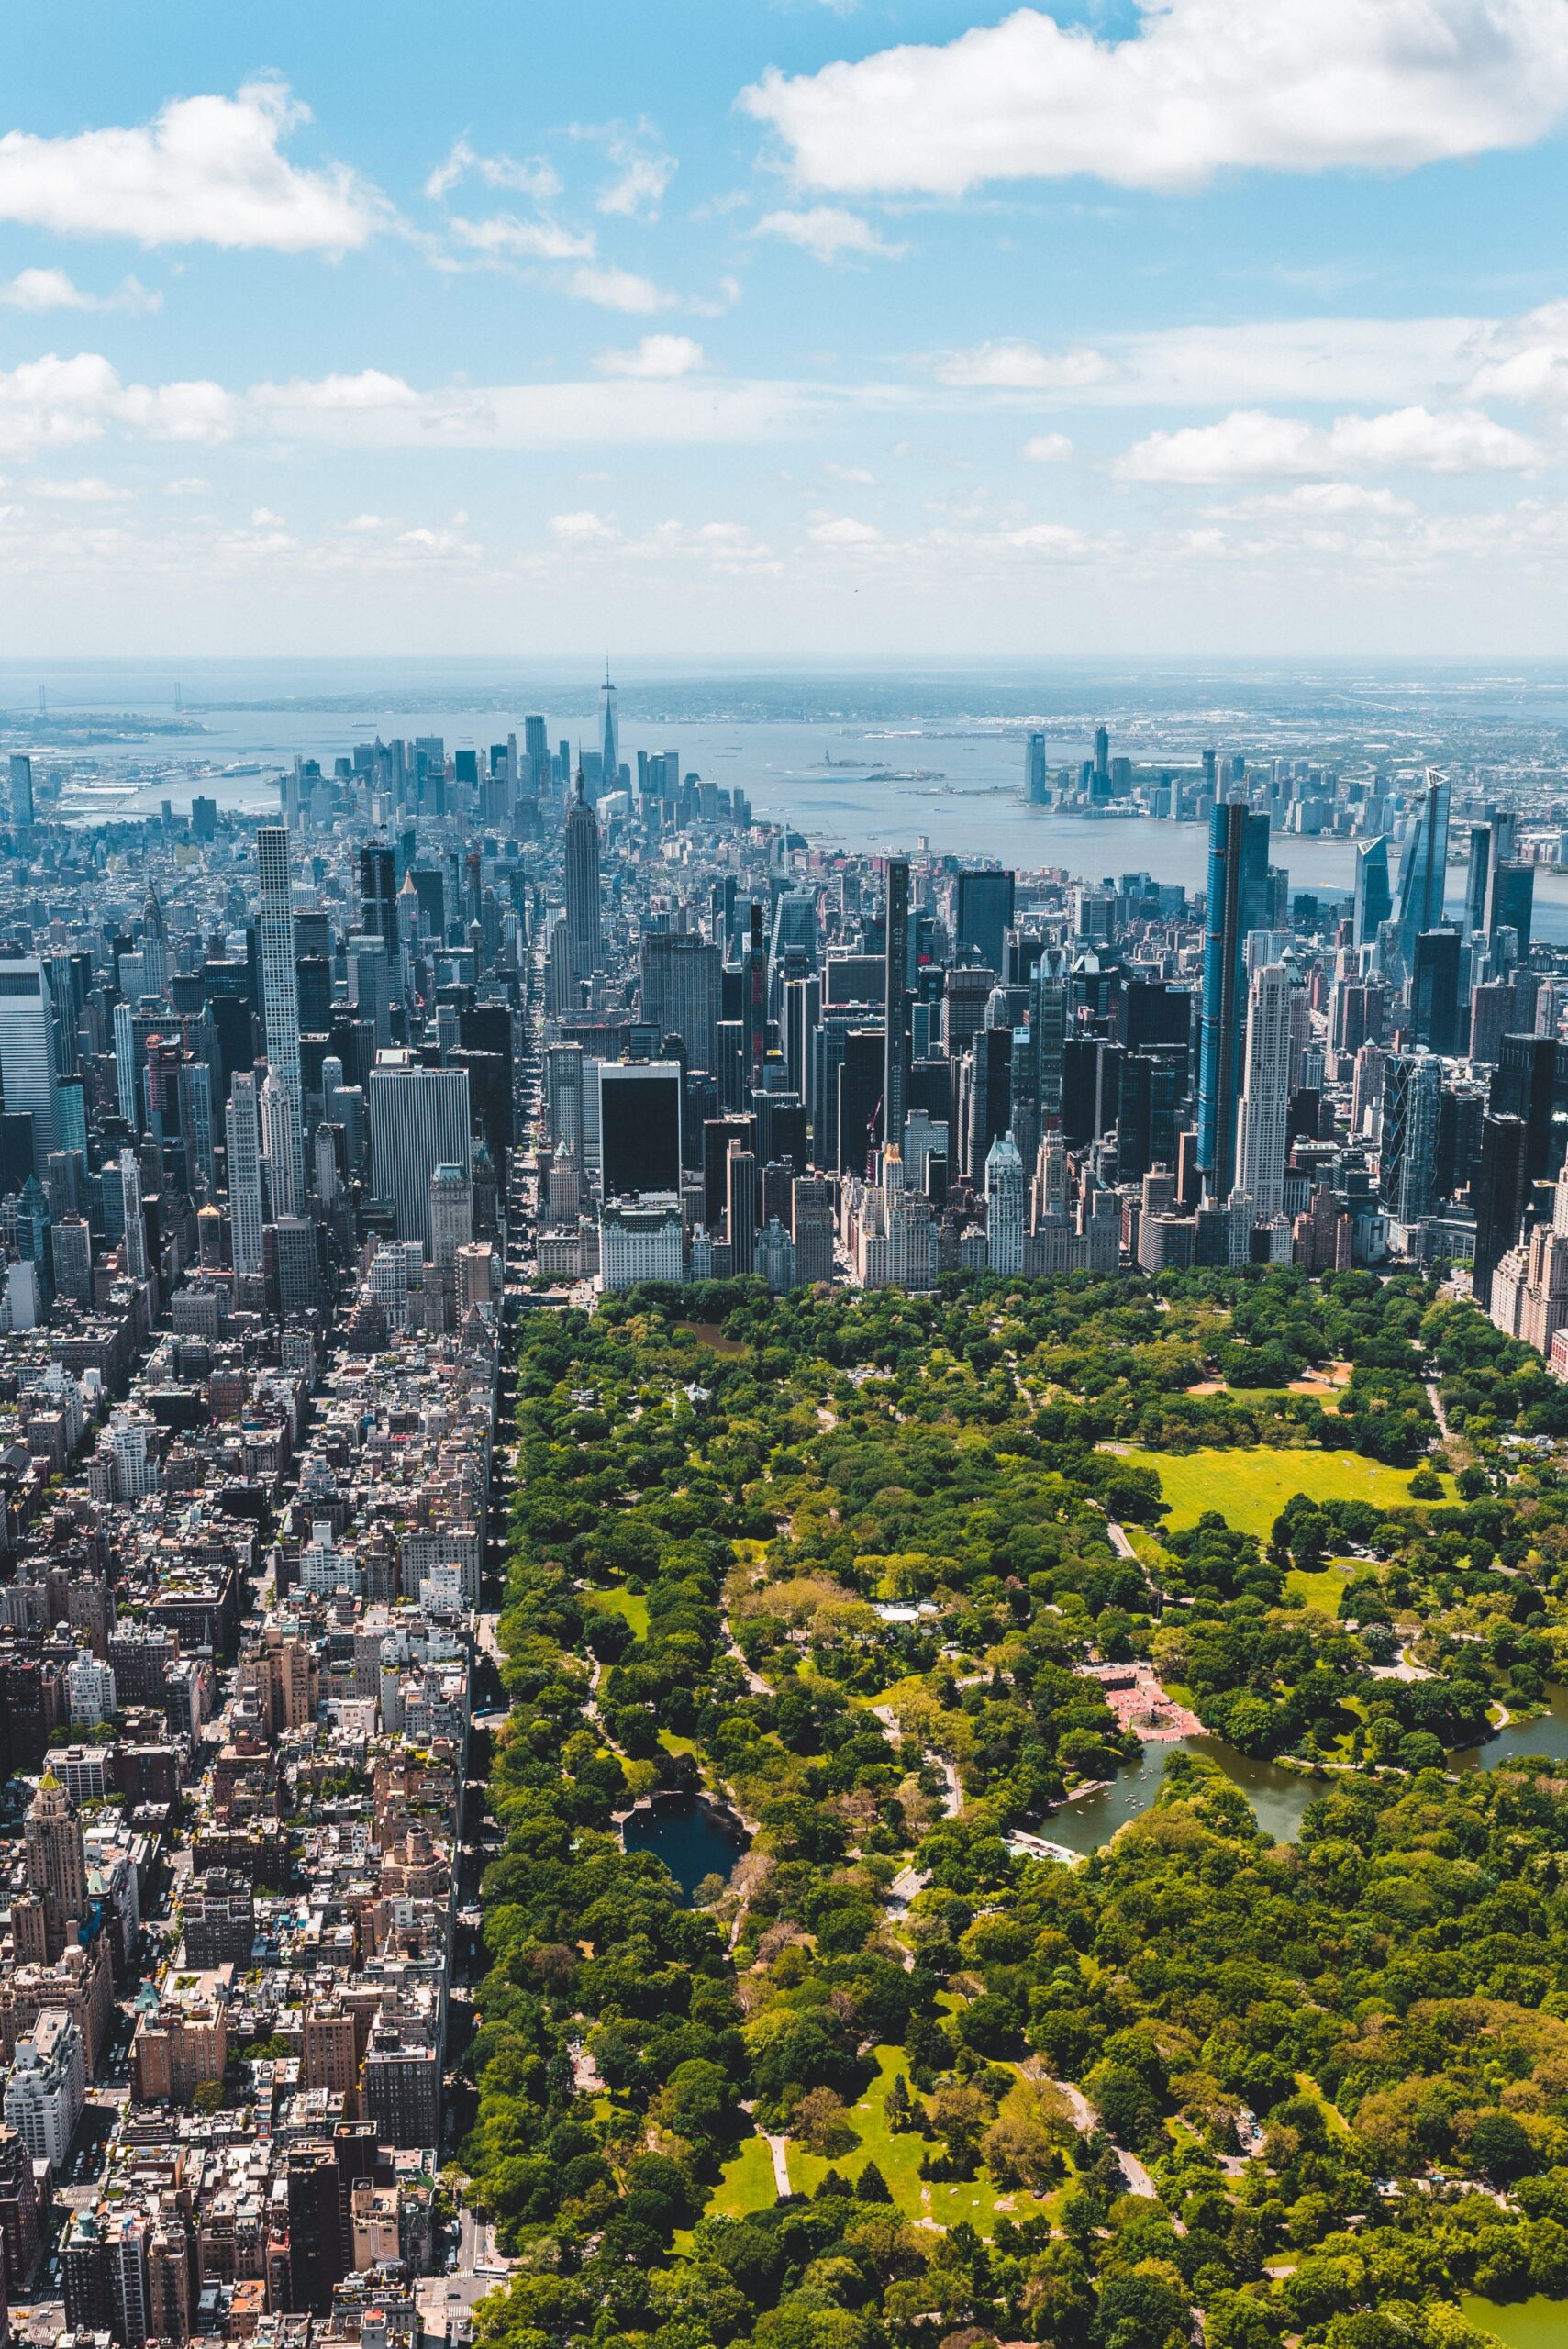 Ariel image of New York City skyline and Central Park